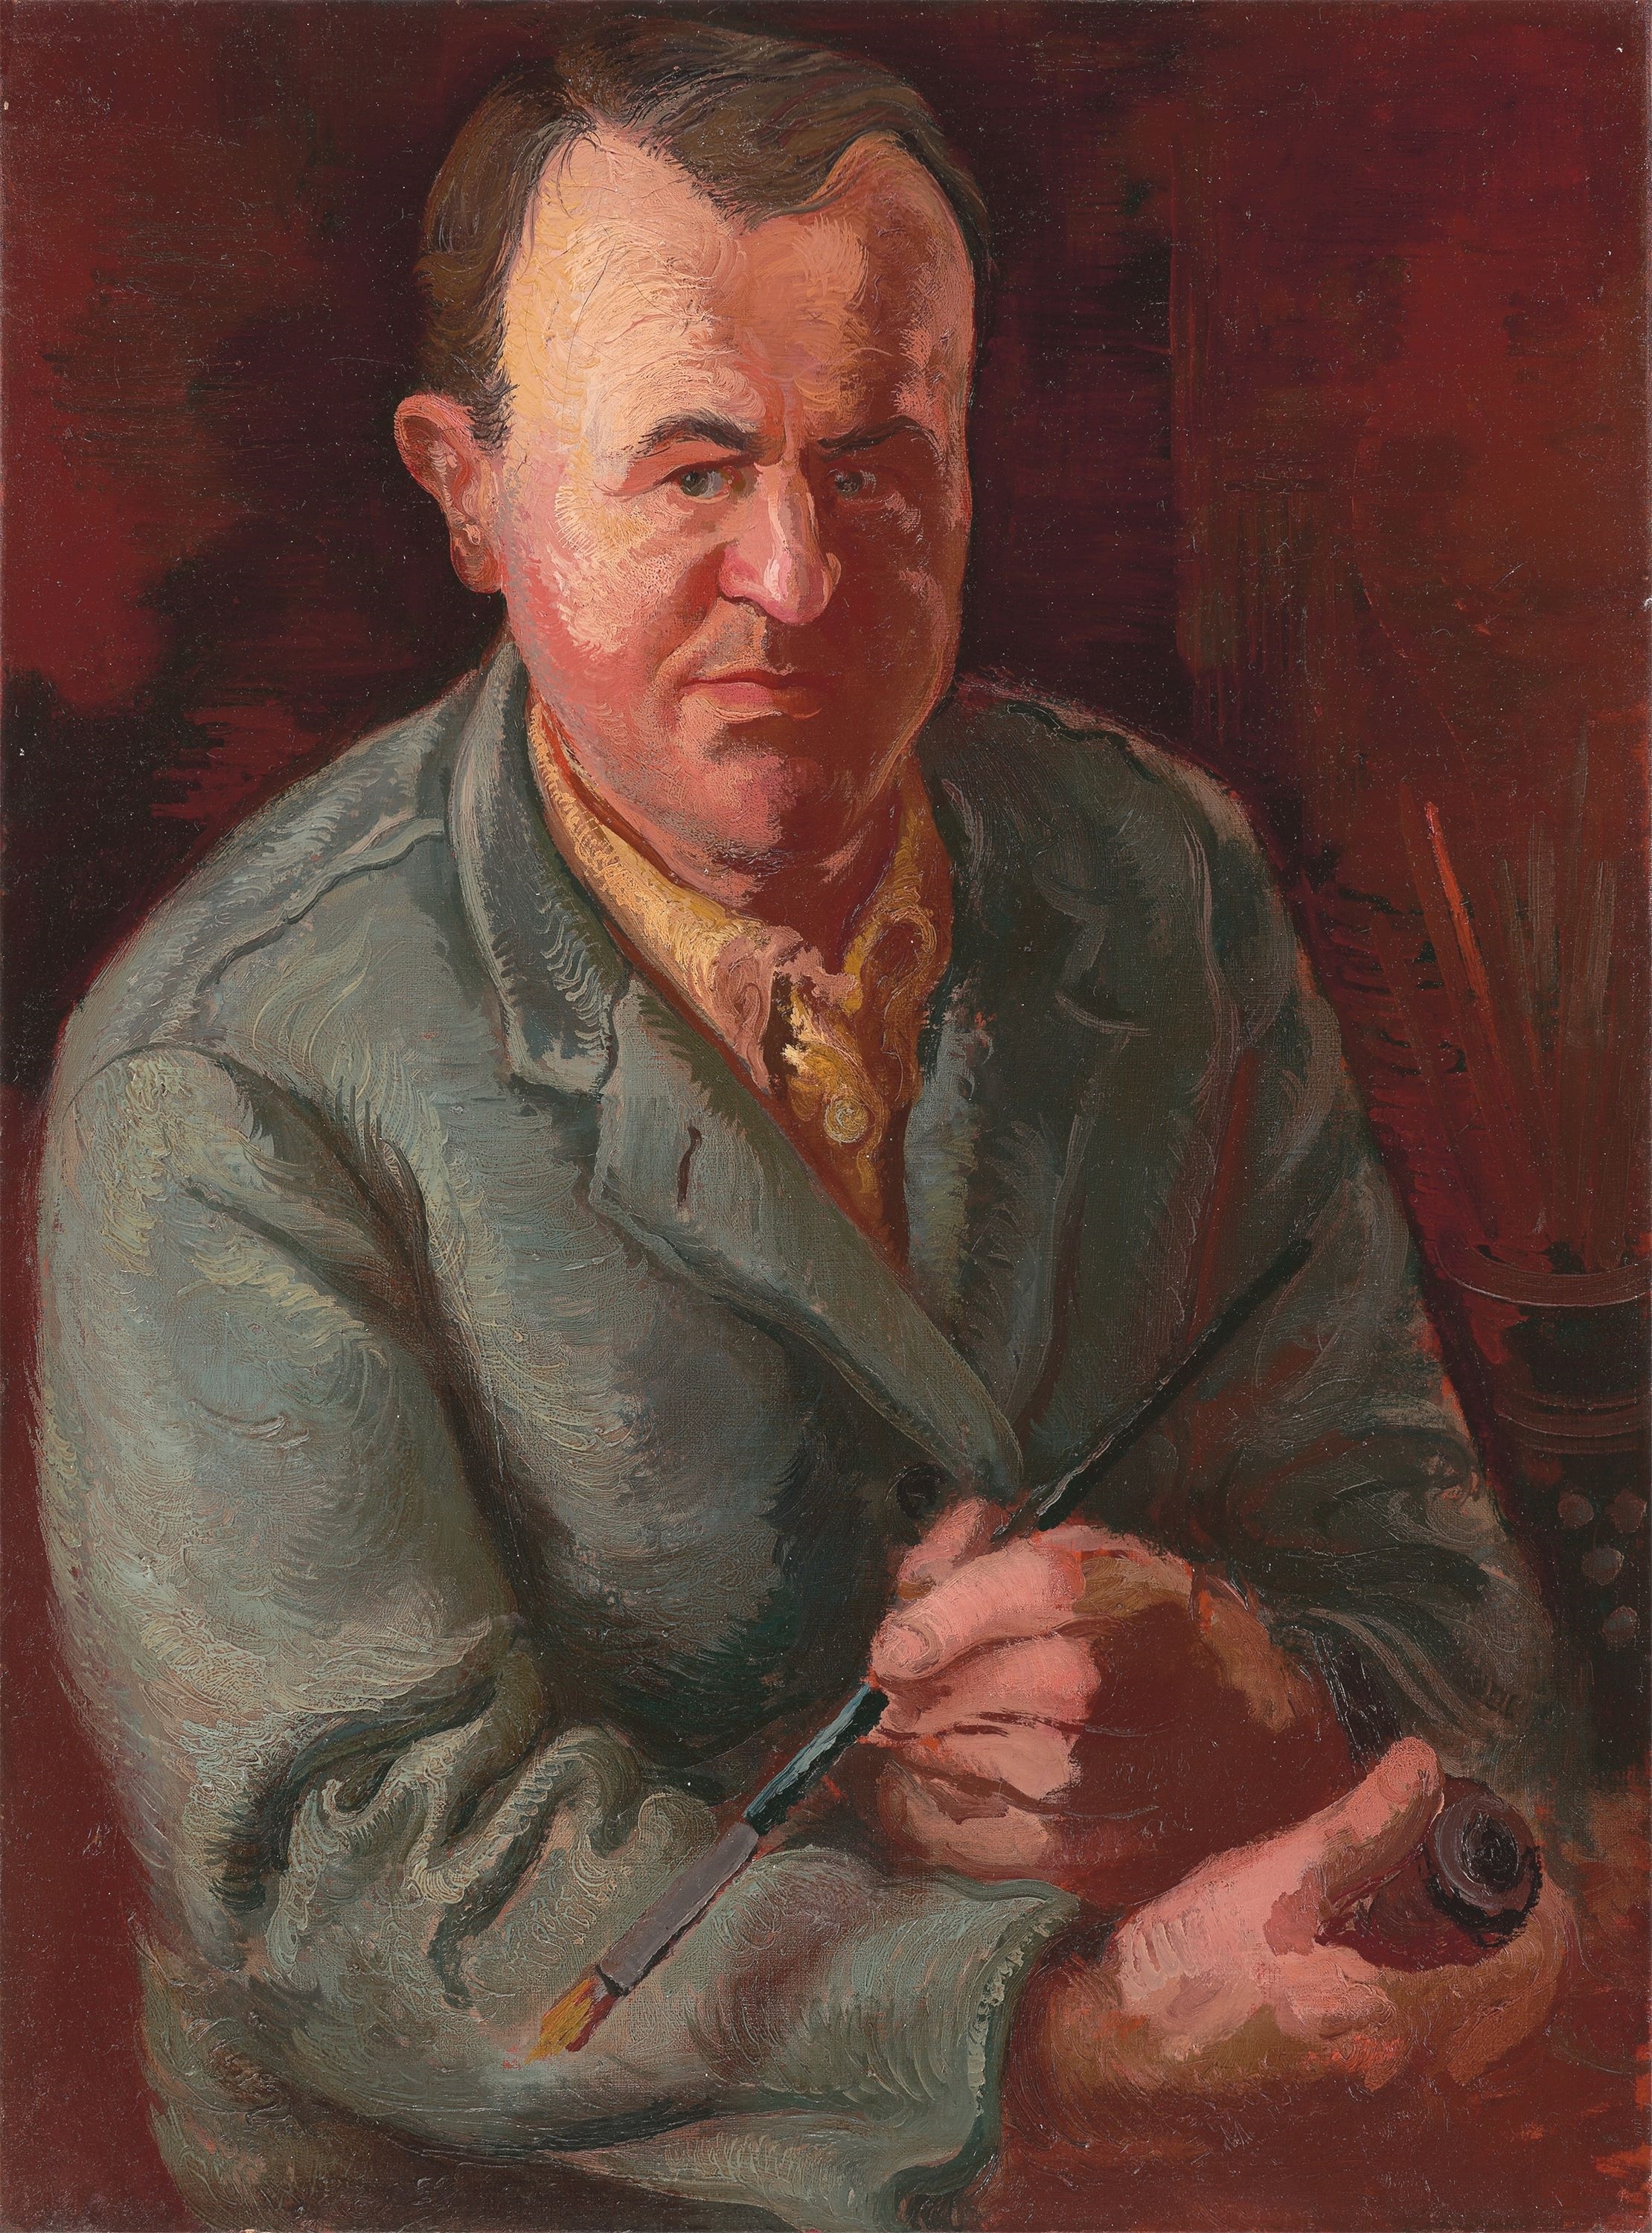 Self Portrait with Brush and Pipe. by George Grosz, 1938